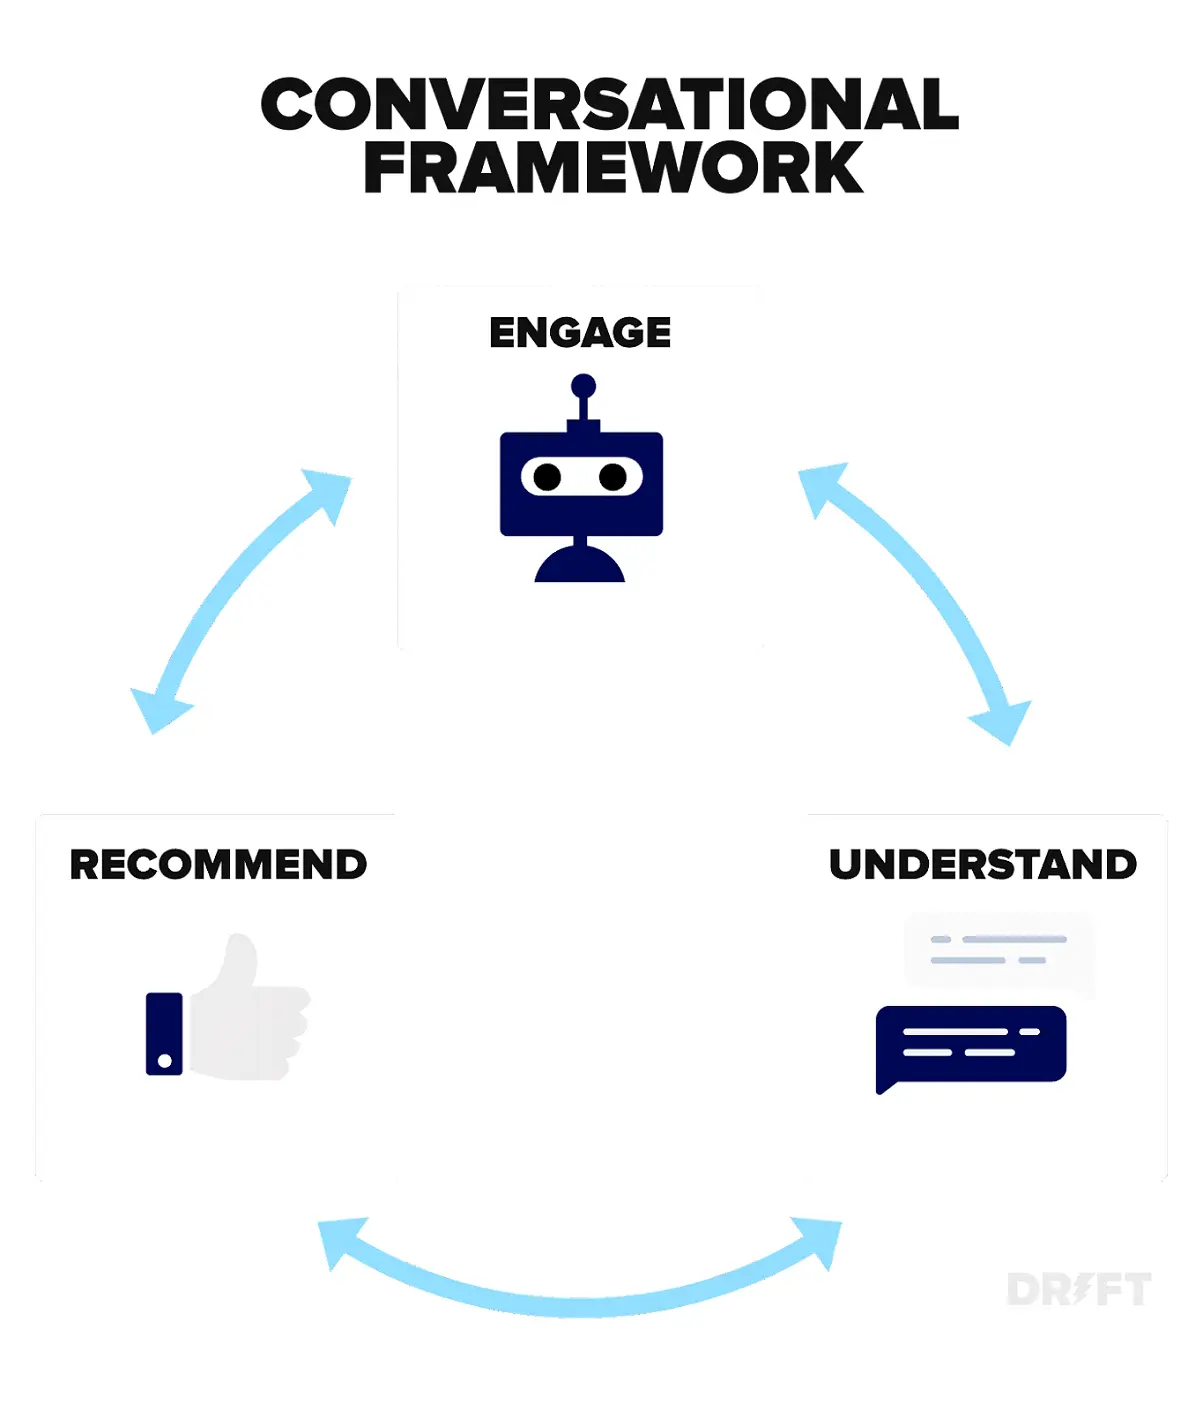 Image_of_Conversational_famework_explainig_cycle_of_Engage_understand_and_Recommmend